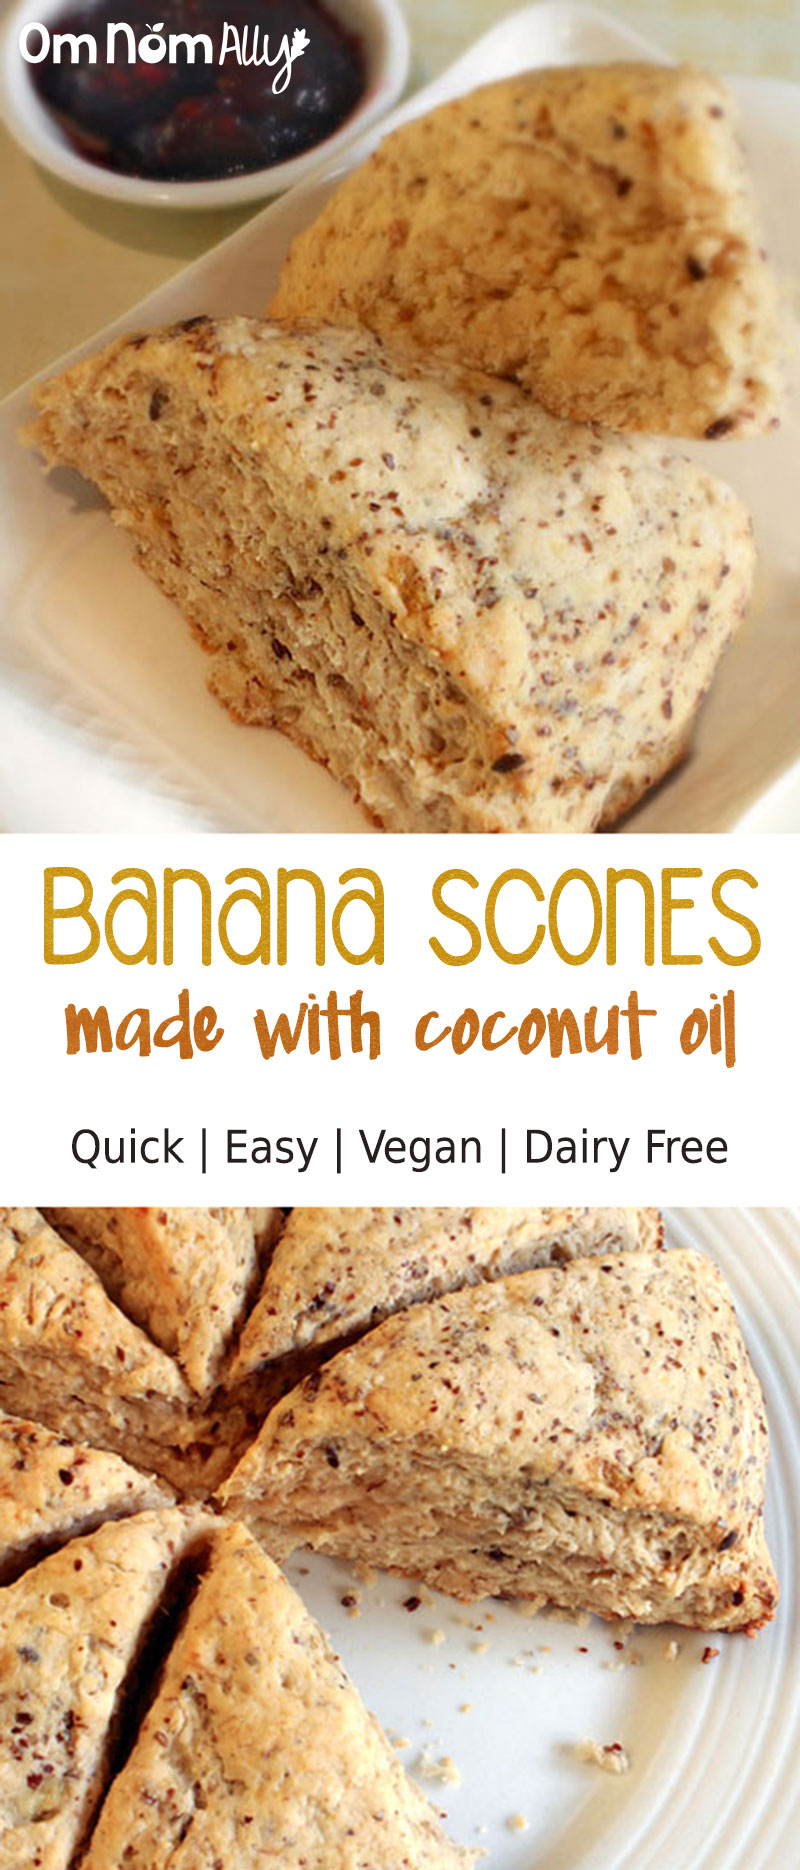 Quick & Easy Vegan Banana Scones @OmNomAlly | Made with coconut oil and coconut sugar, these Vegan Banana Scones are flaky and cakey for the most delicious brunch ever.